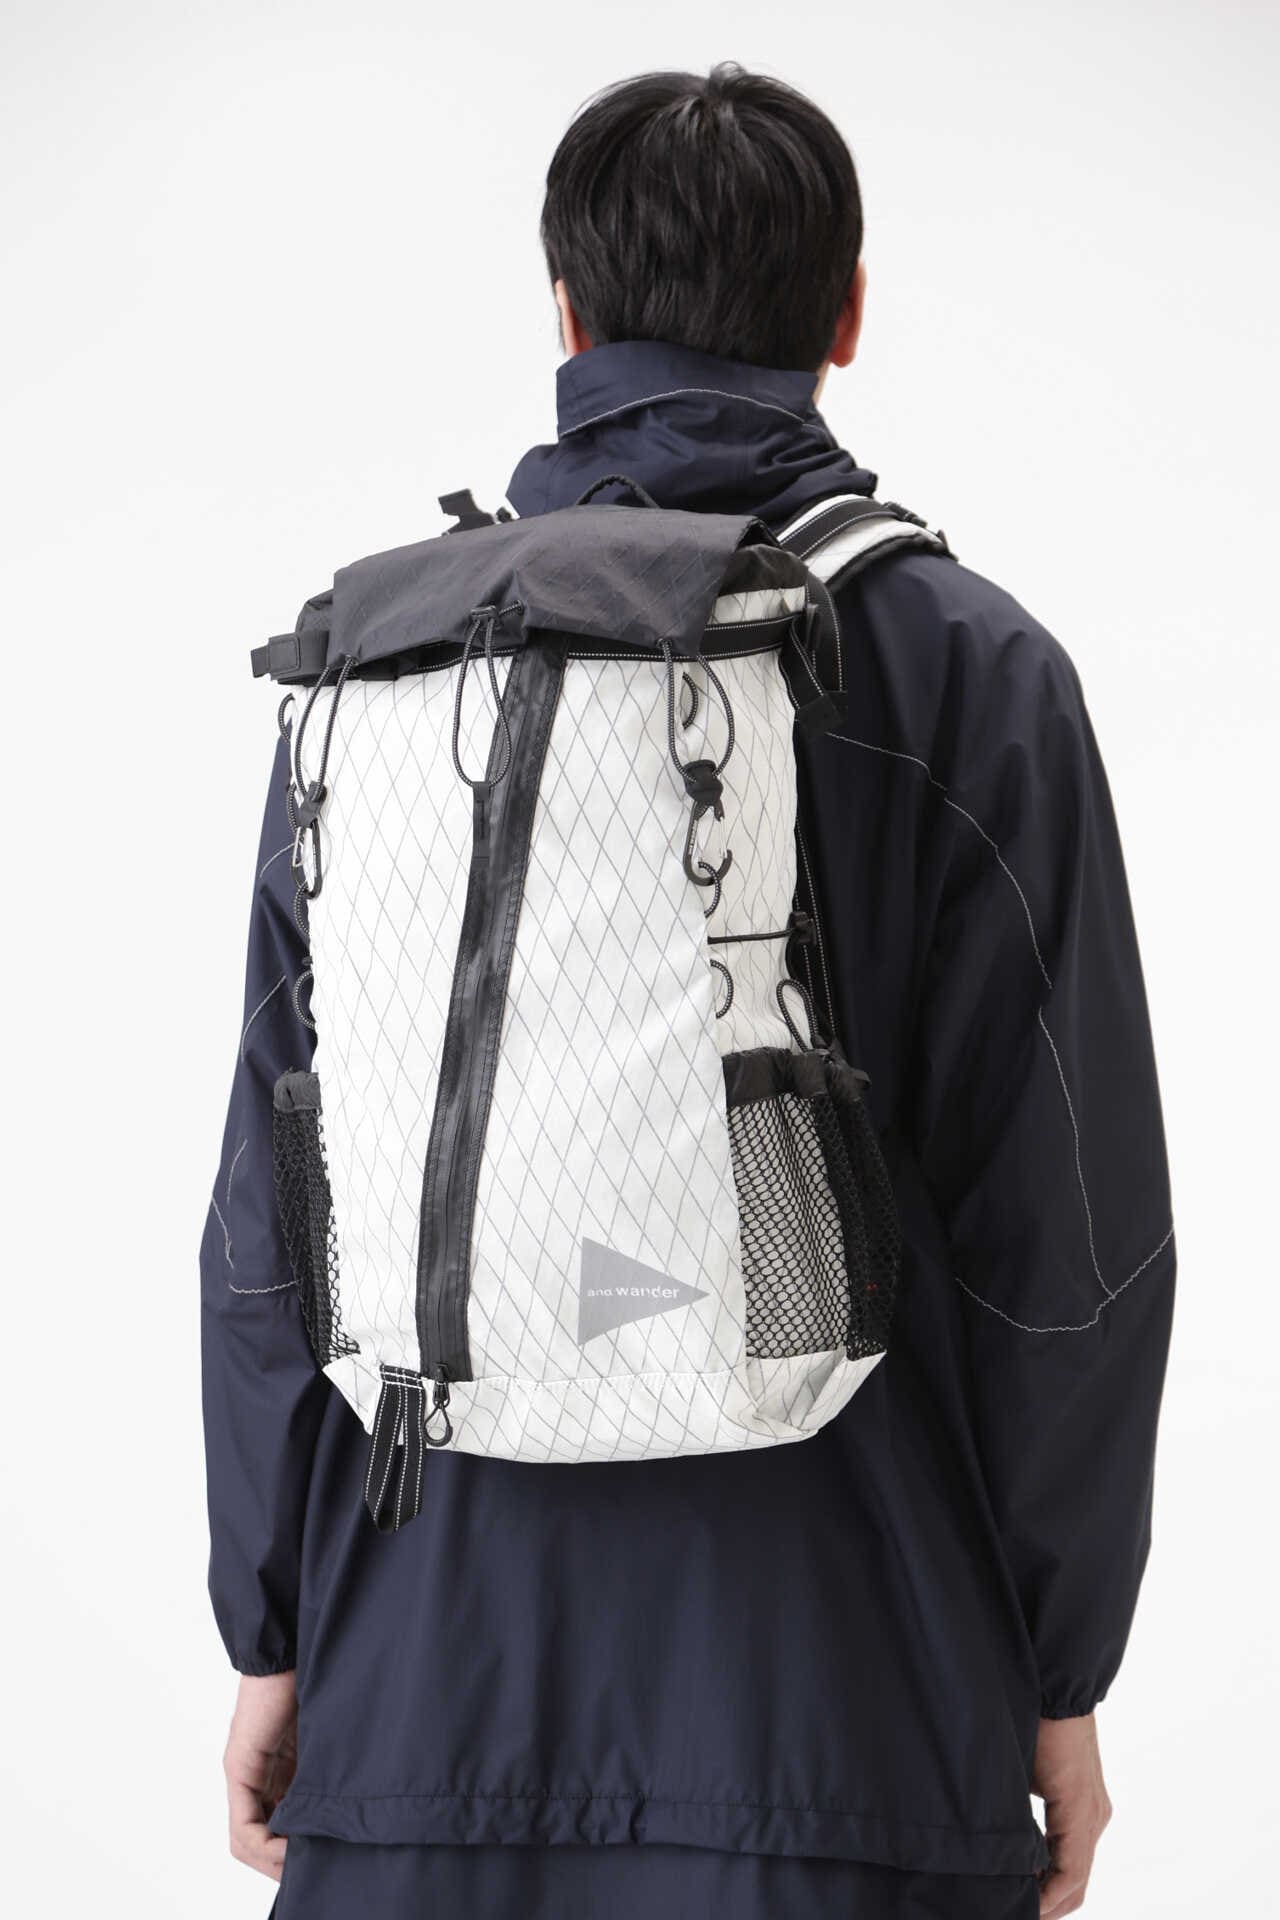 X-Pac 30L backpack | and wander ONLINE STORE